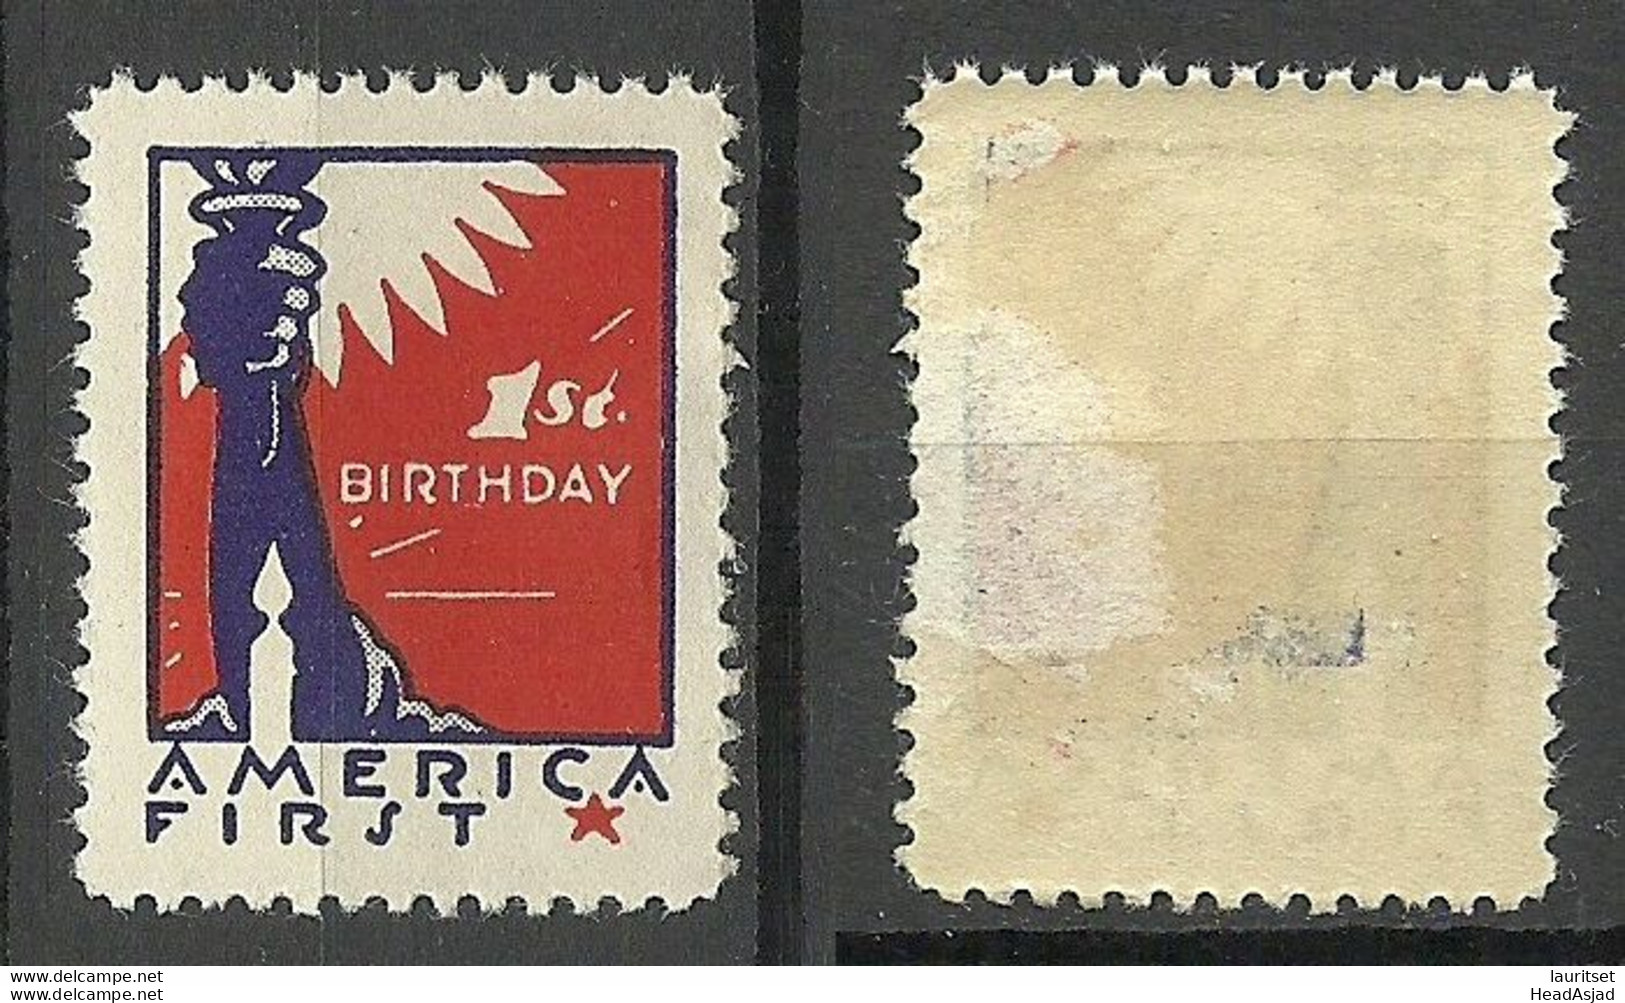 USA Patriotic Vignette America First Poster Stamp NB! Defect - Thinned Place! - Cinderellas